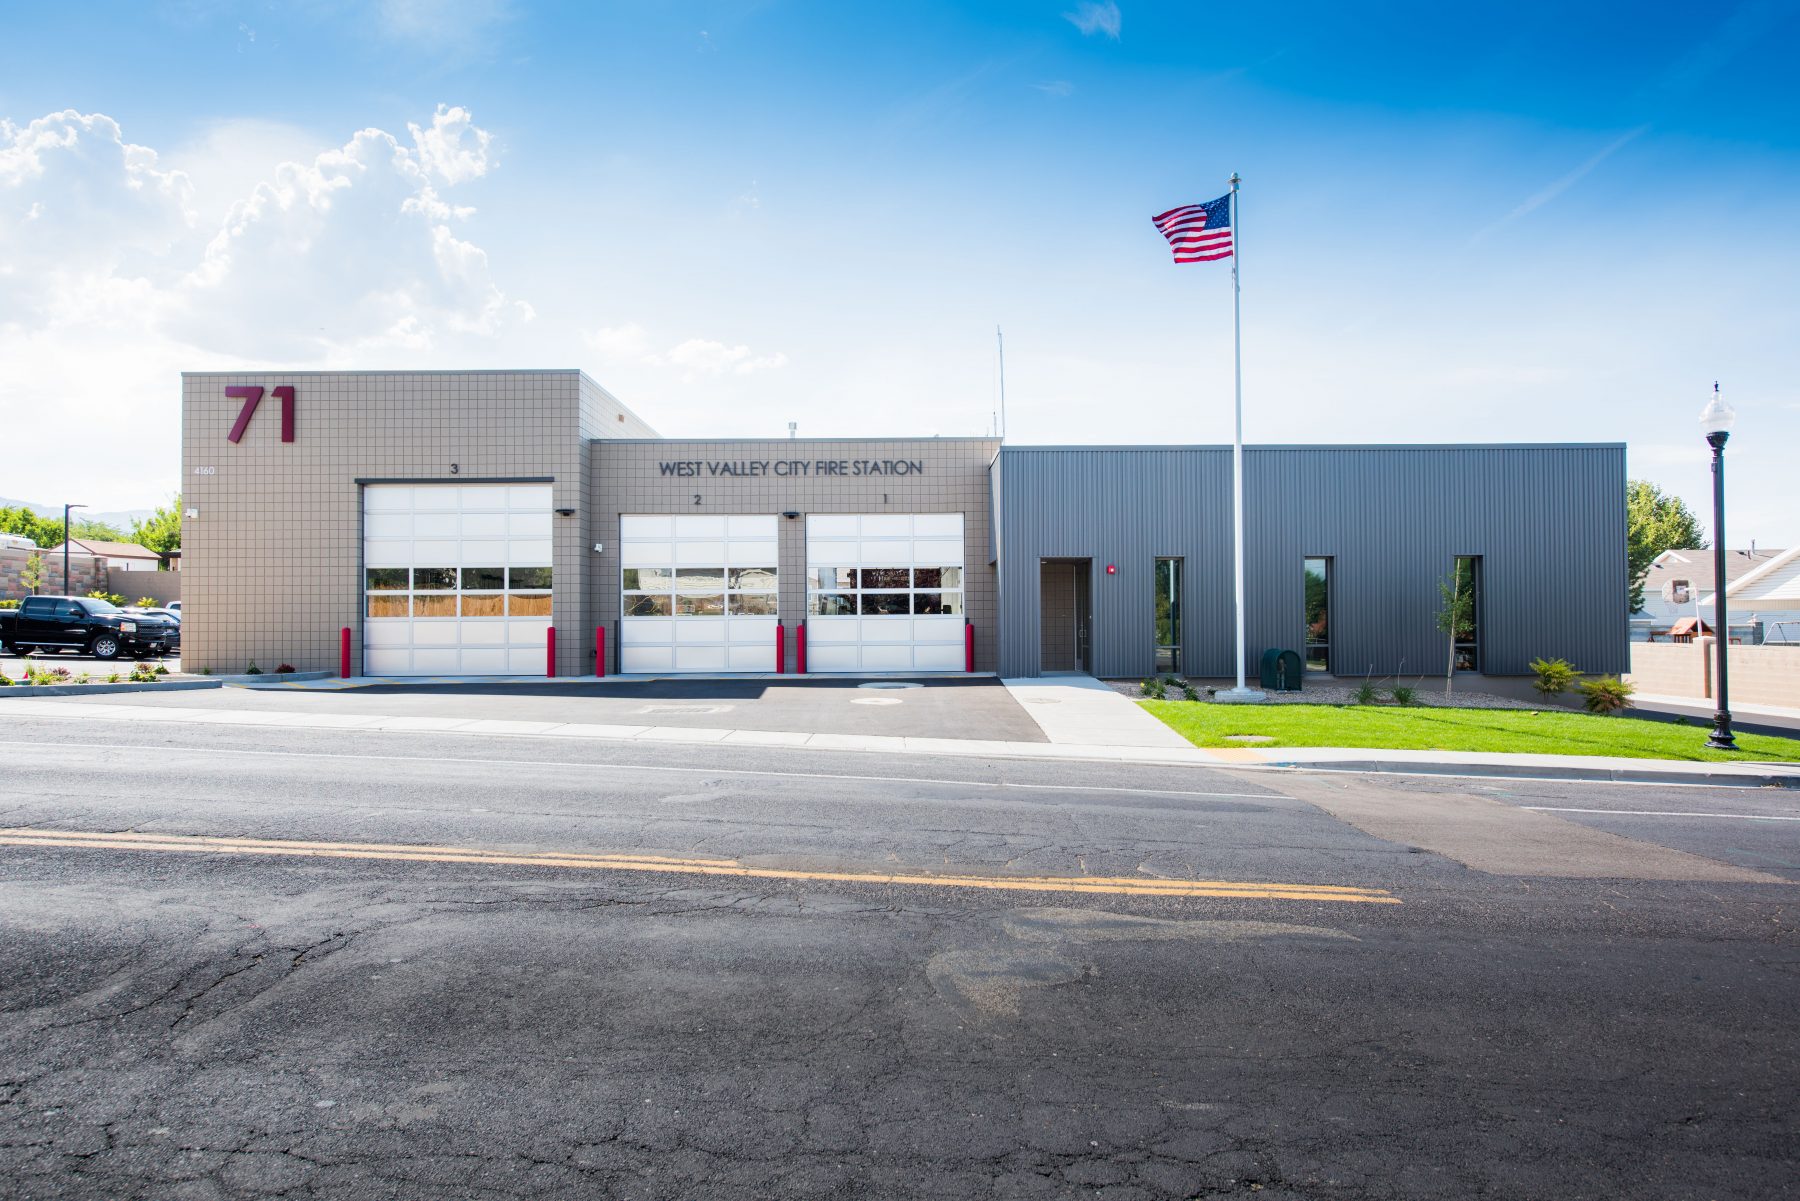 West Valley City Fire Station #71